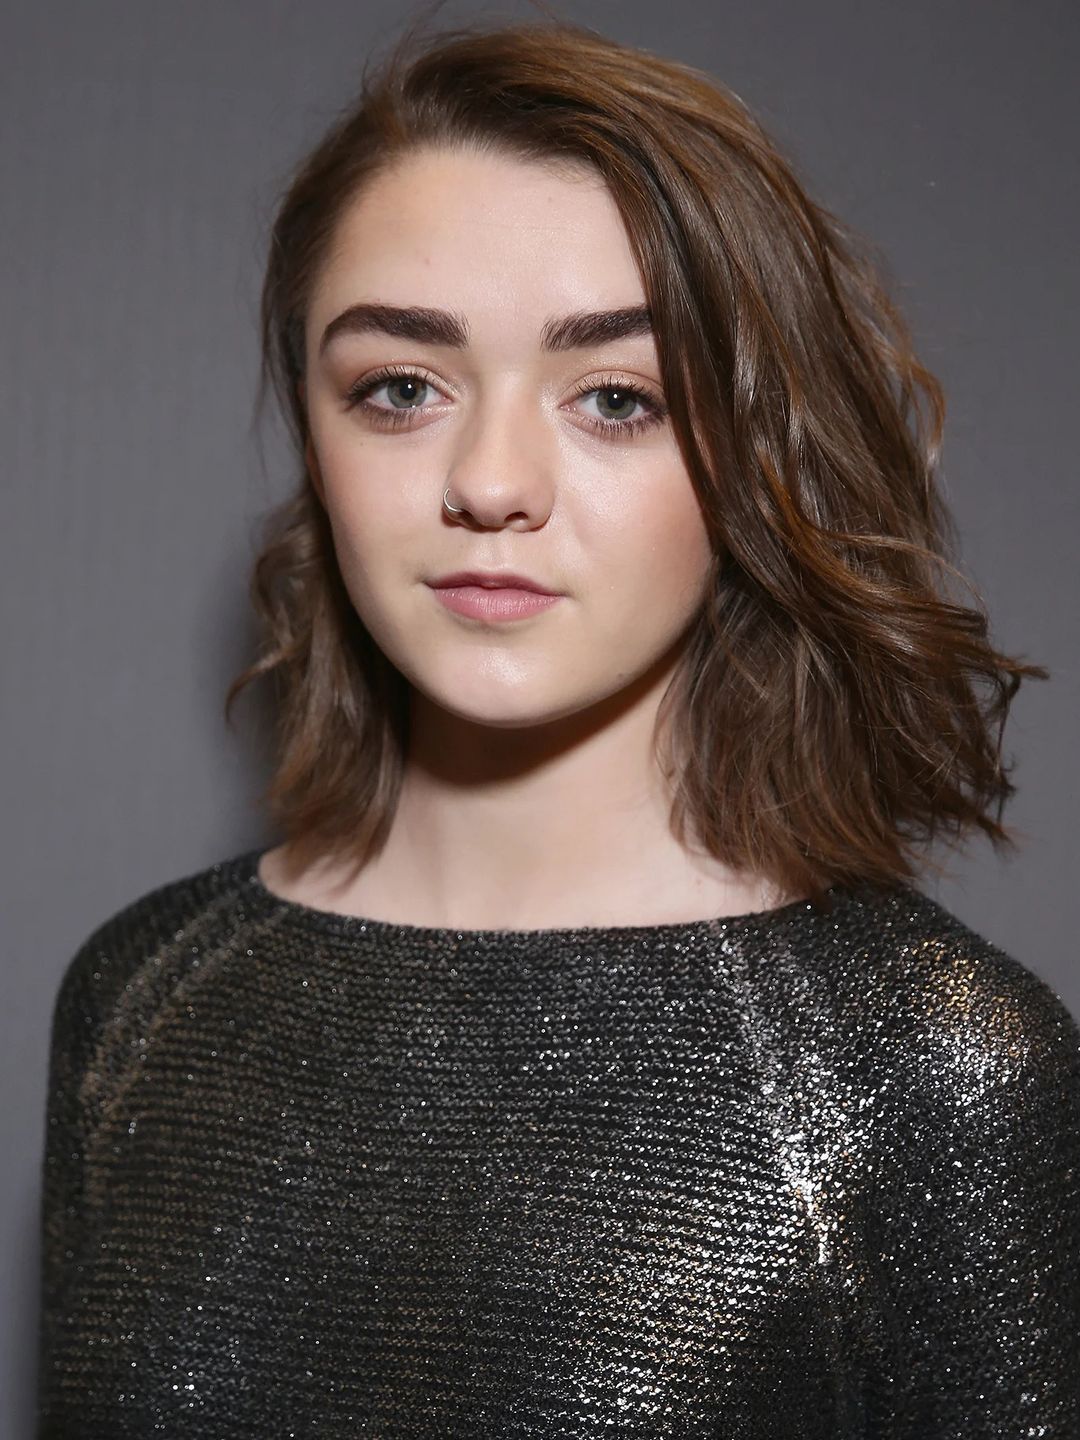 Maisie Williams where is she now